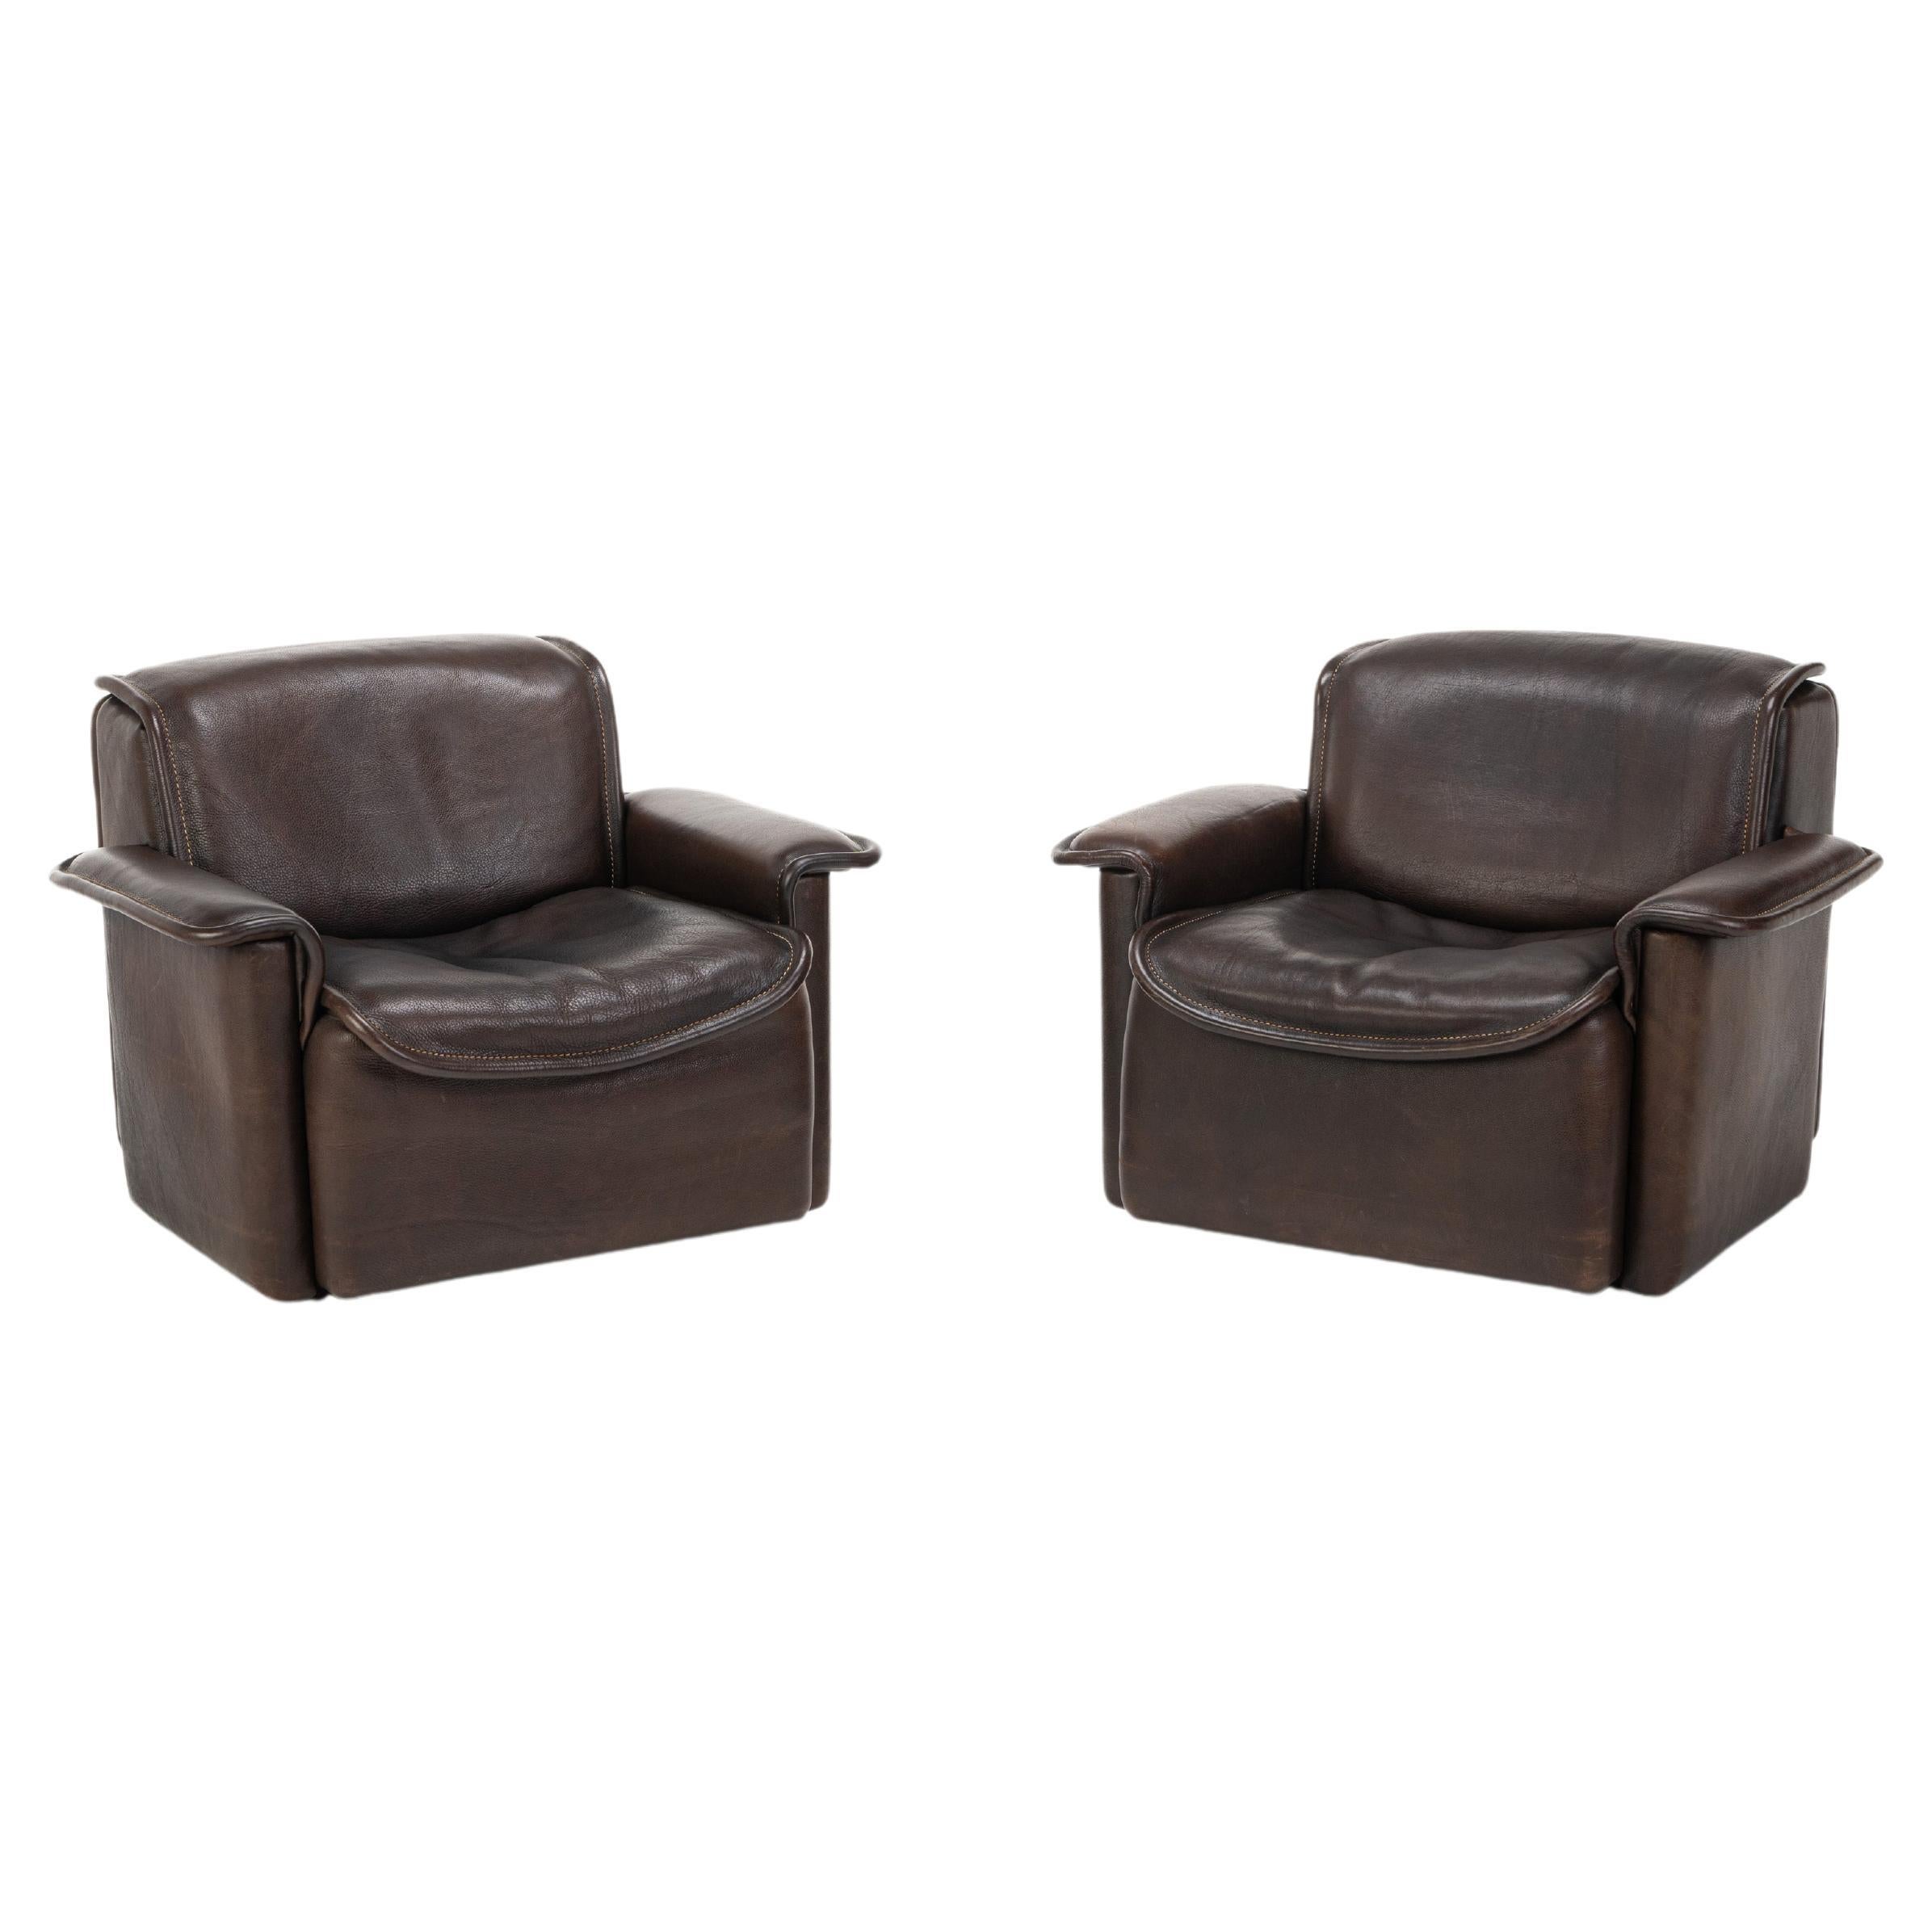 Set of 2 Ds12 Lounge Chairs from de Sede, Switzerland 1970s For Sale